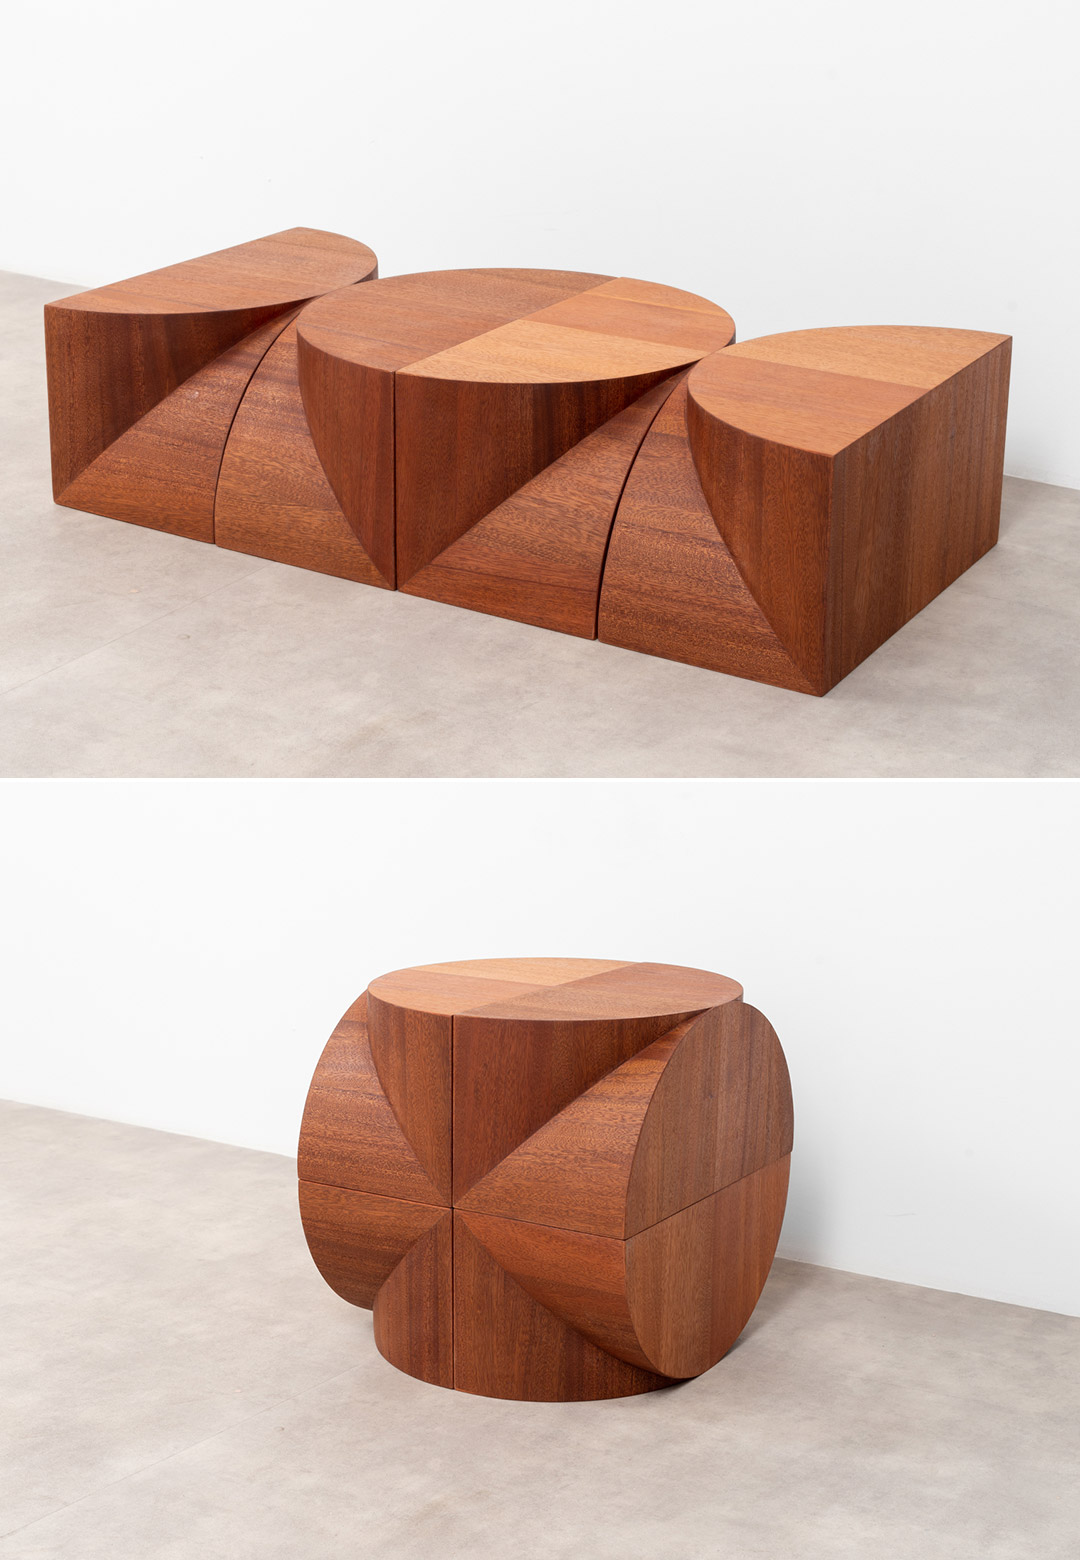 Rino Claessens’ new collection is a series of <em>Stacked Formations</em> for table designs